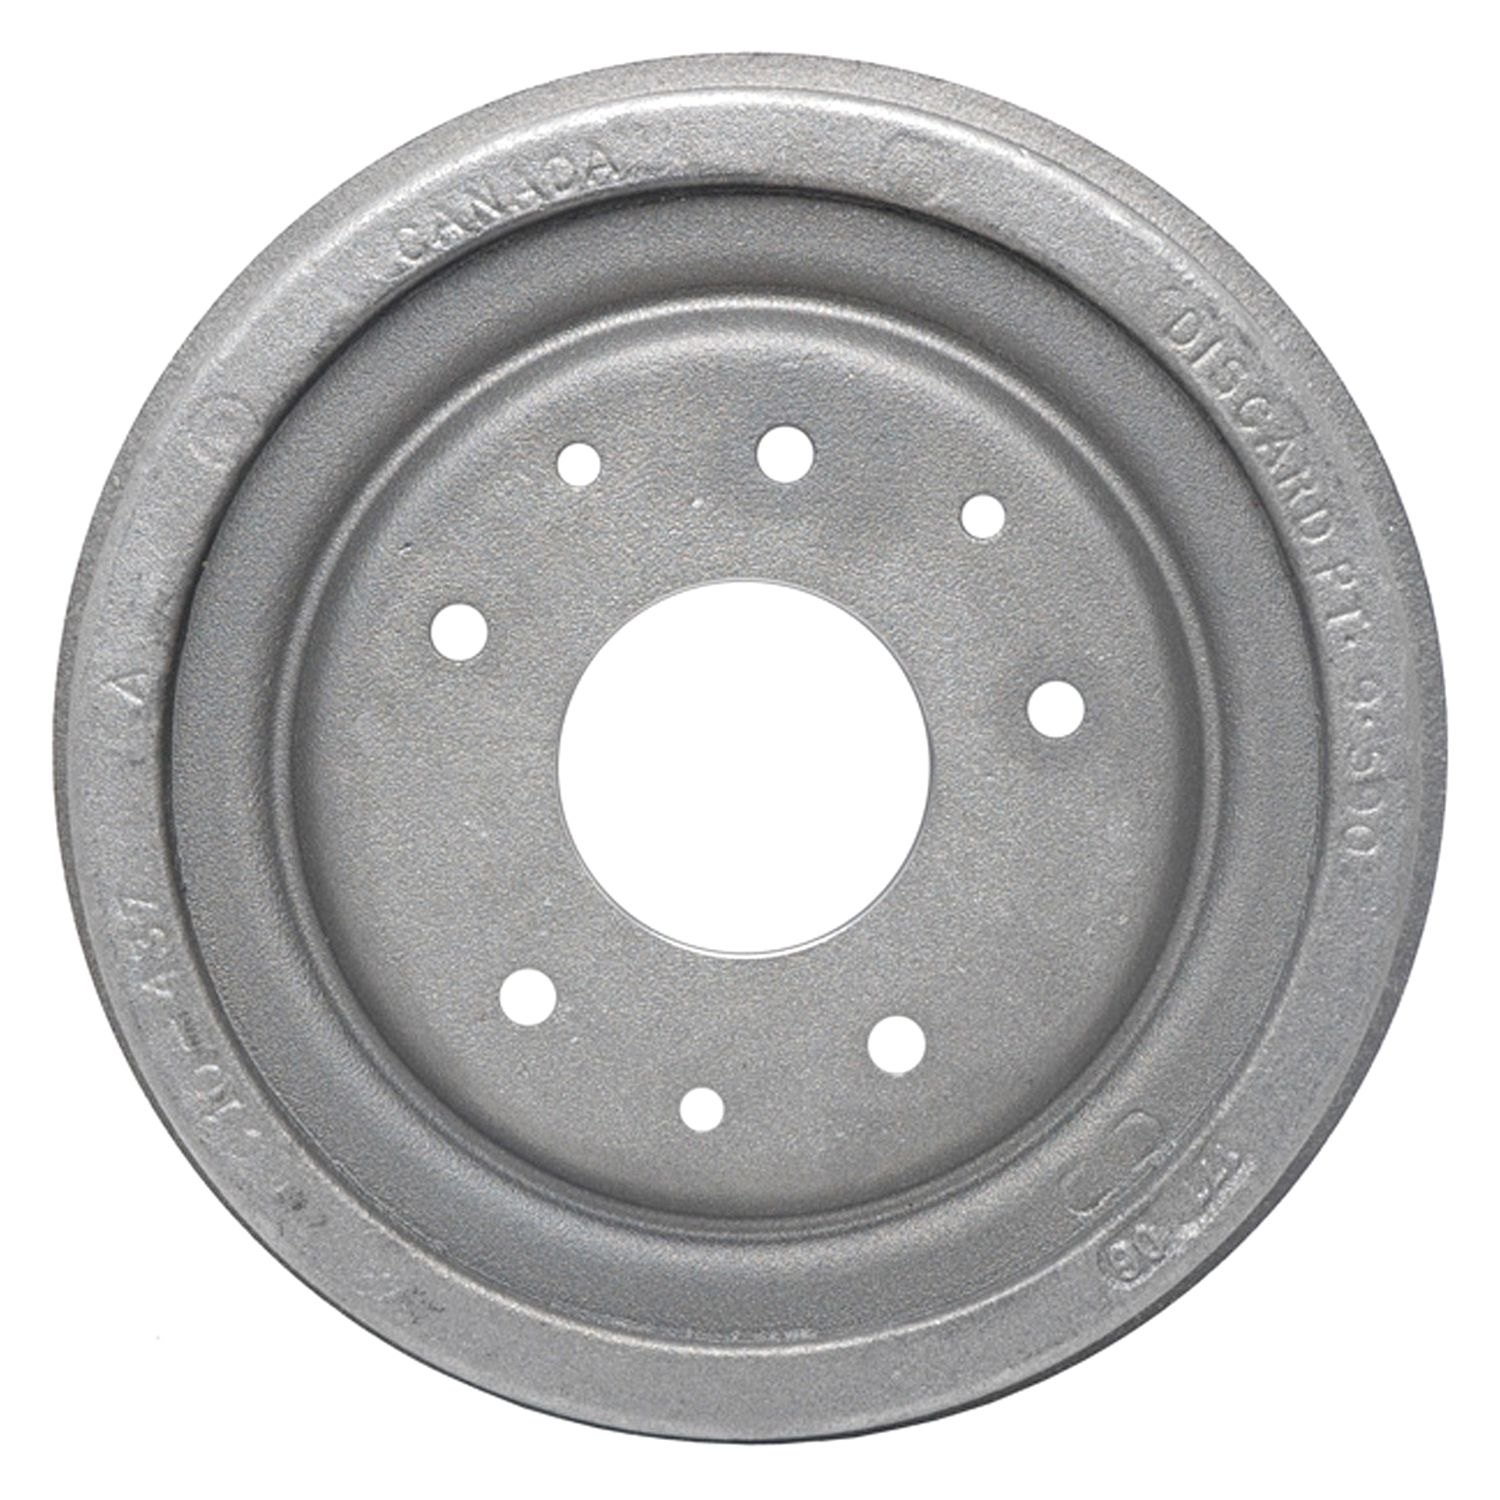 ACDelco 18B466 Professional Front Brake Drum